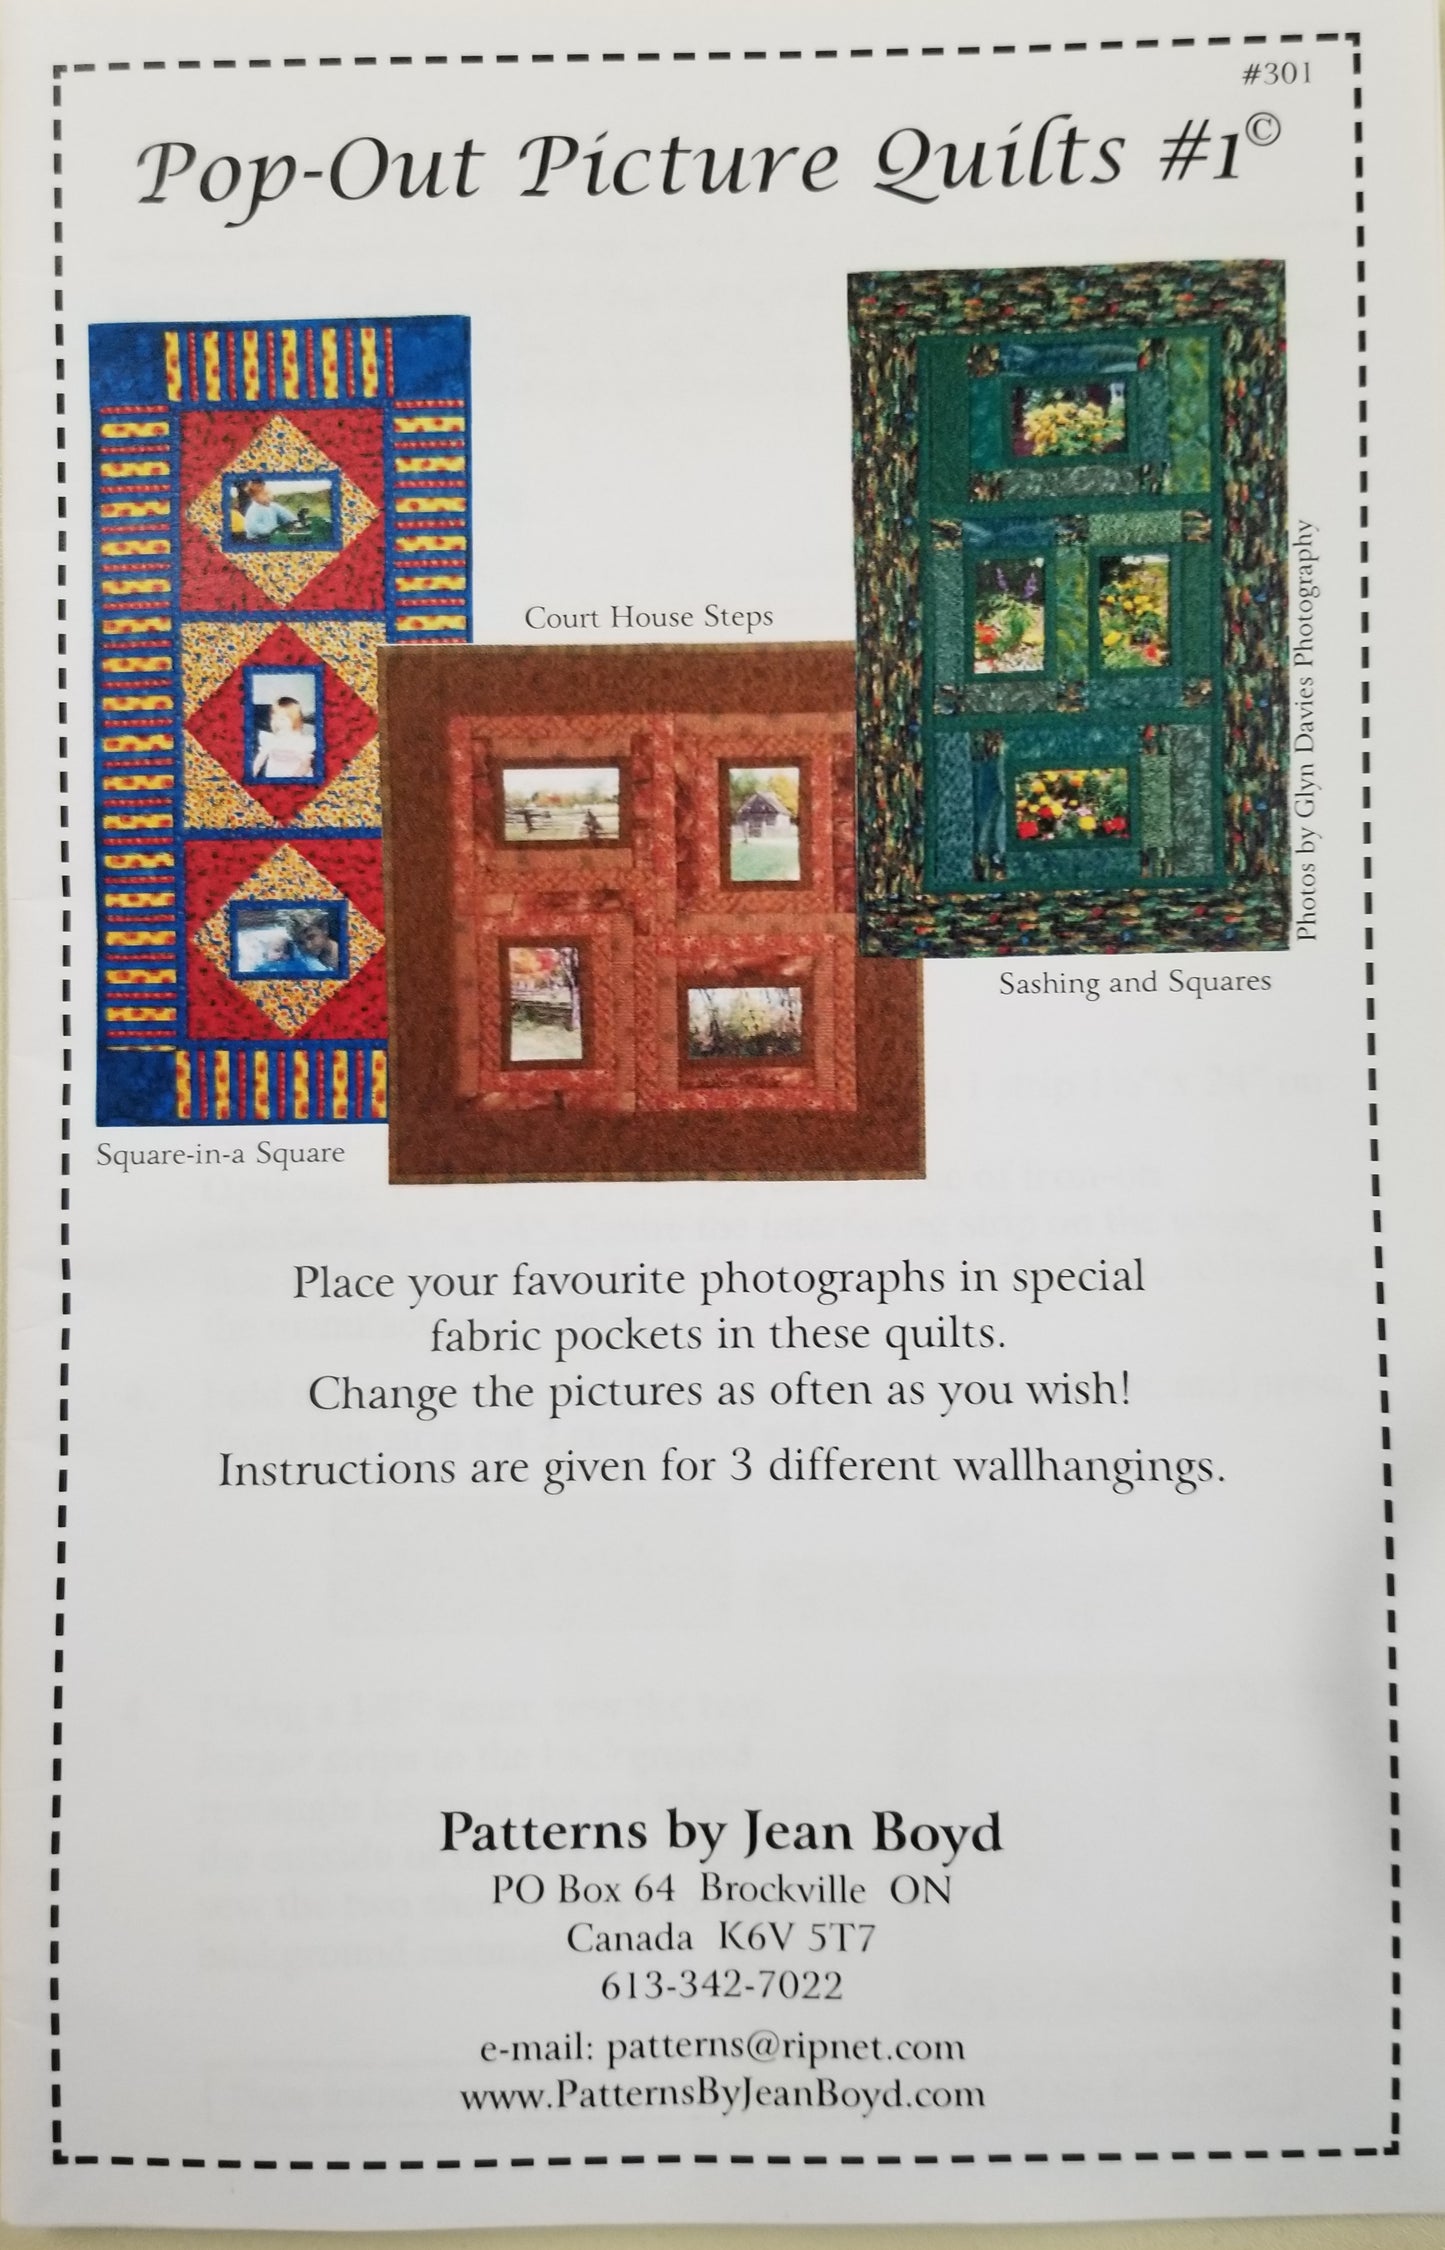 Pop-Out Picture Quilts #1 by Patterns by Jean Boyd